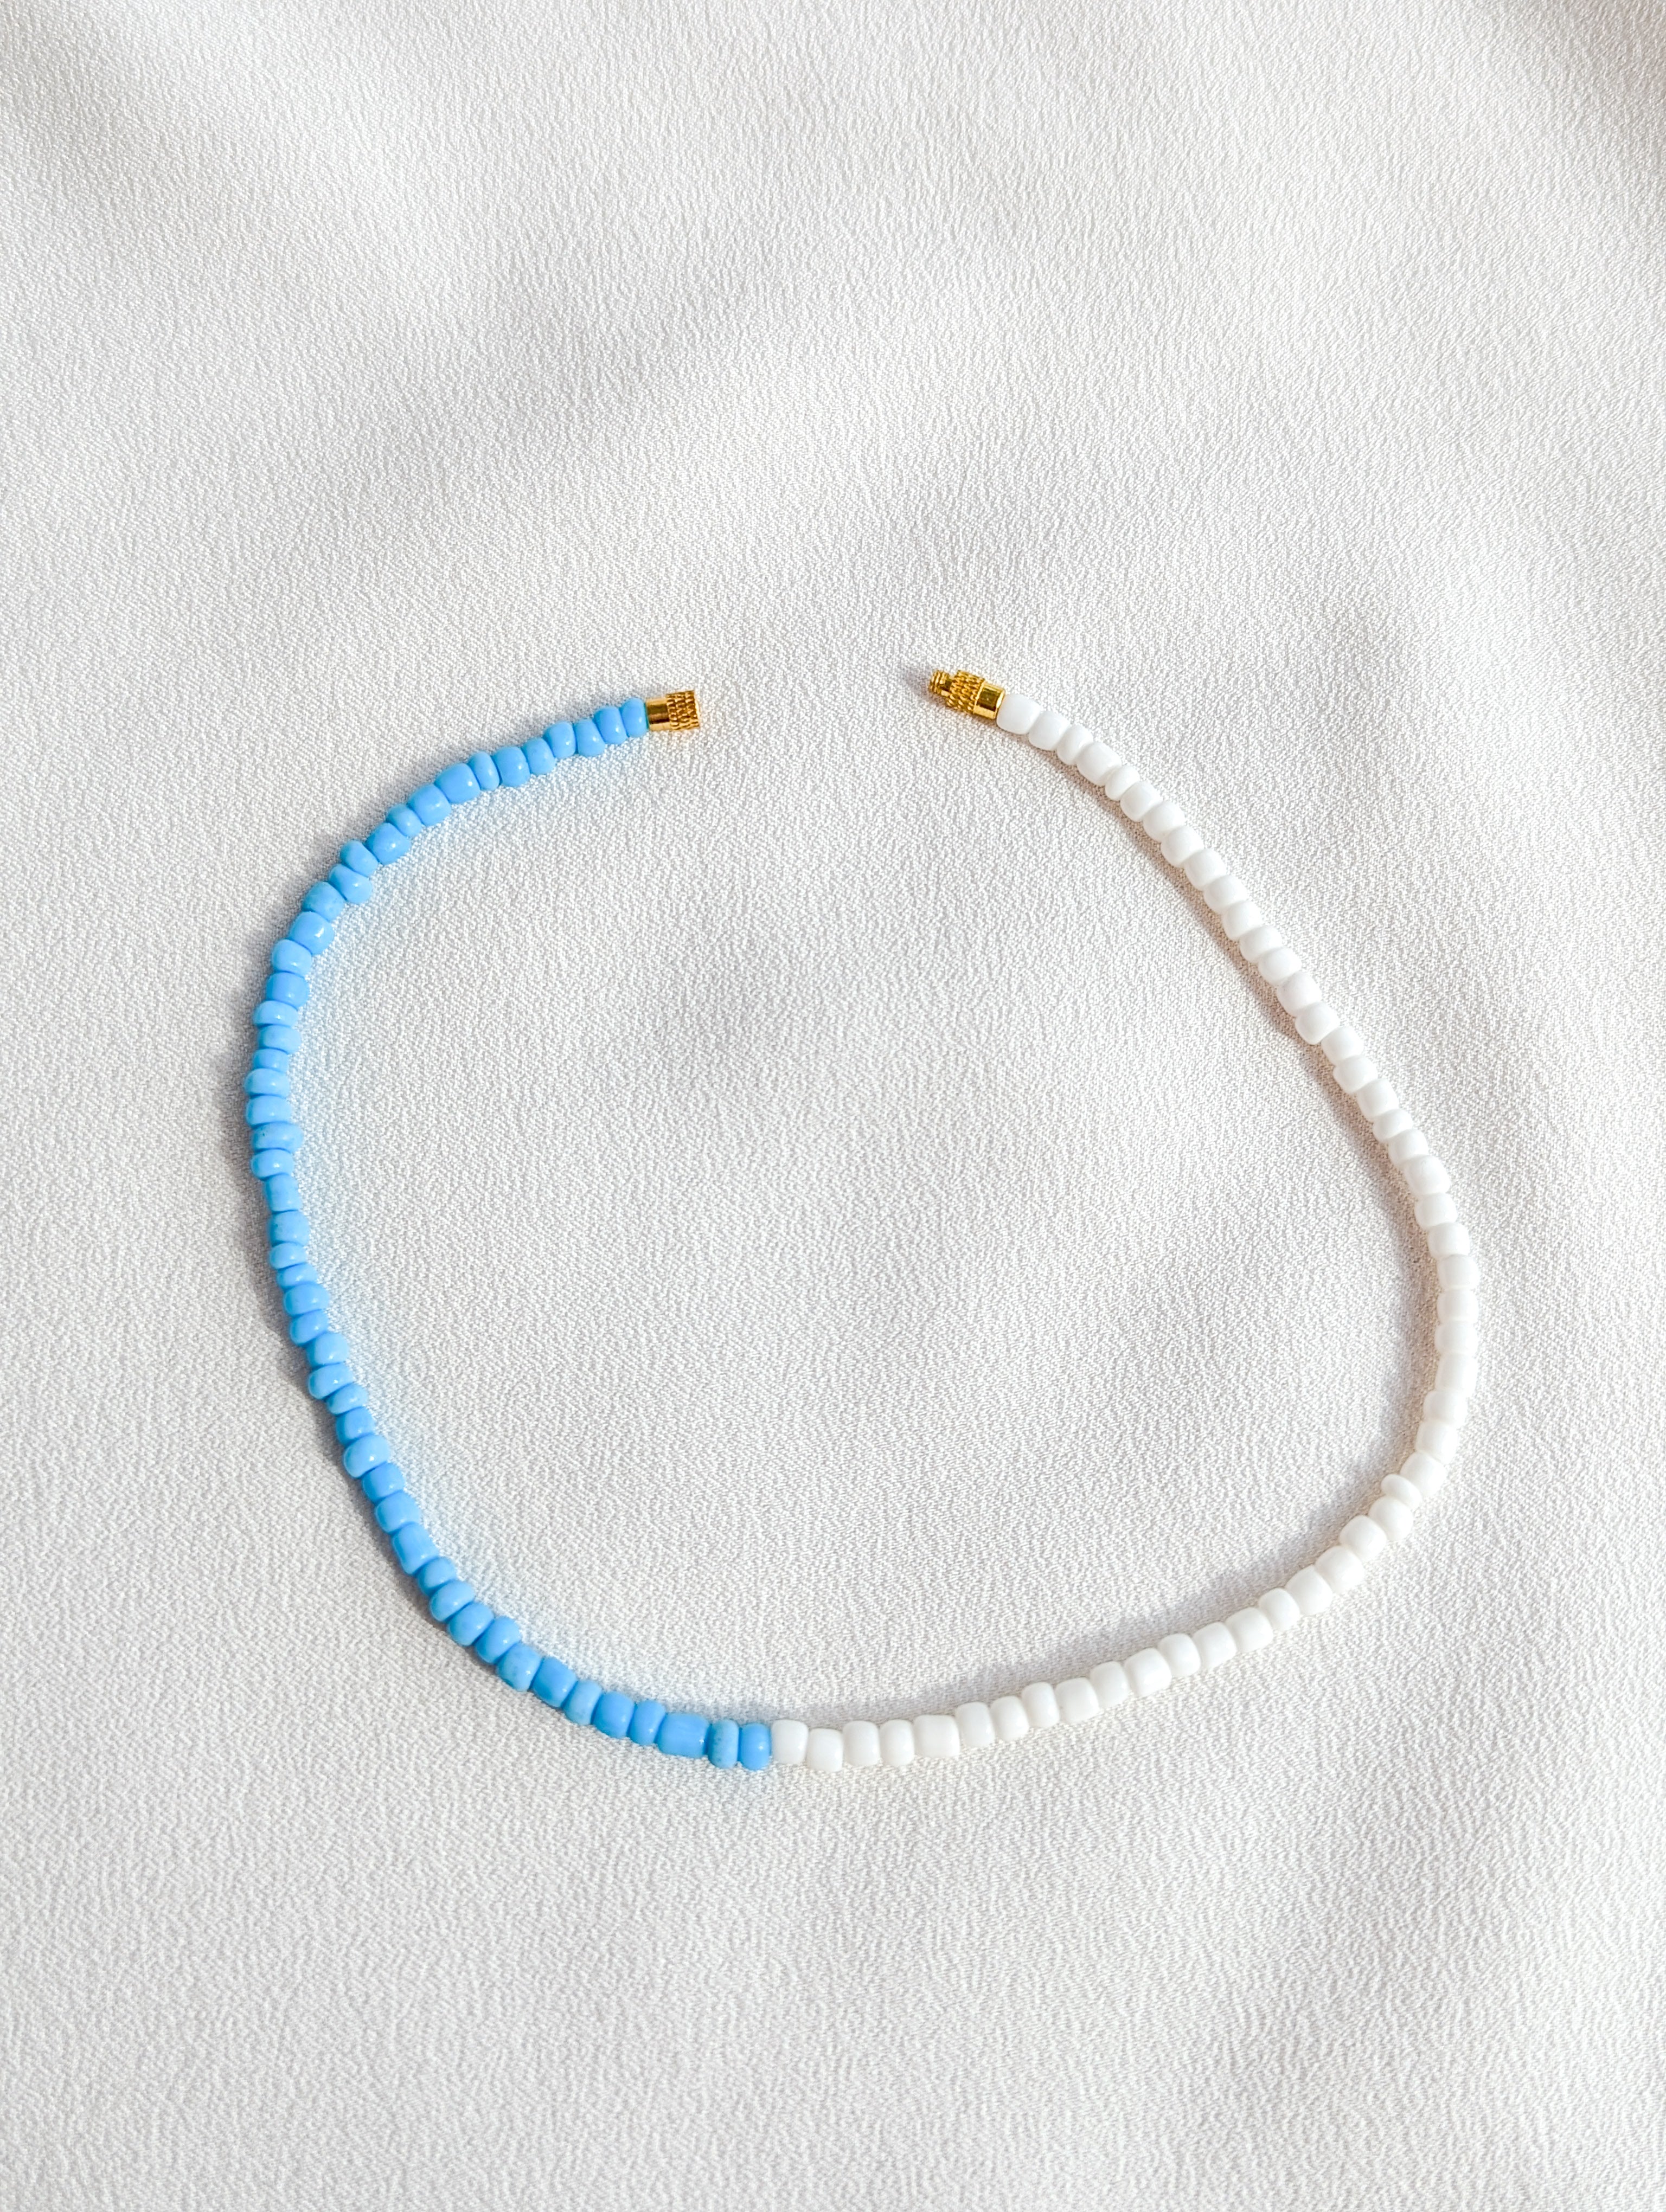 [THE FIFTY] Necklace: White/Blue [Small Beads]